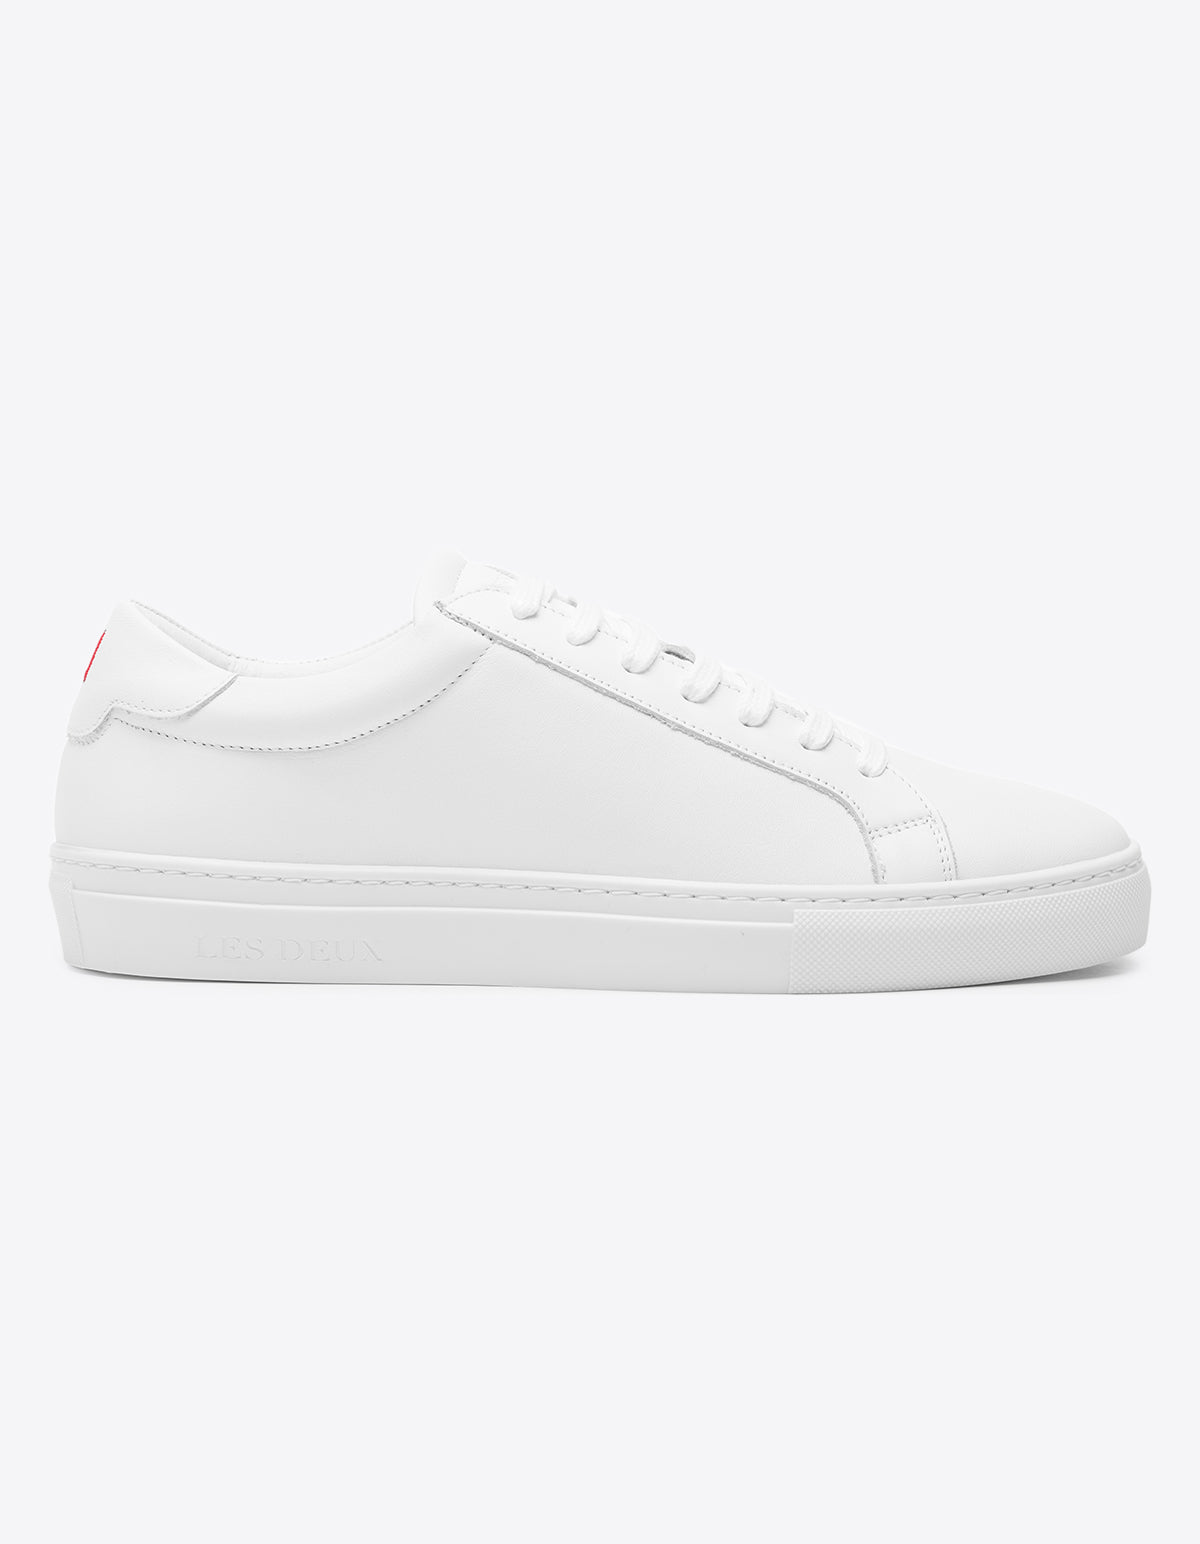 Theodor Leather Sneaker White